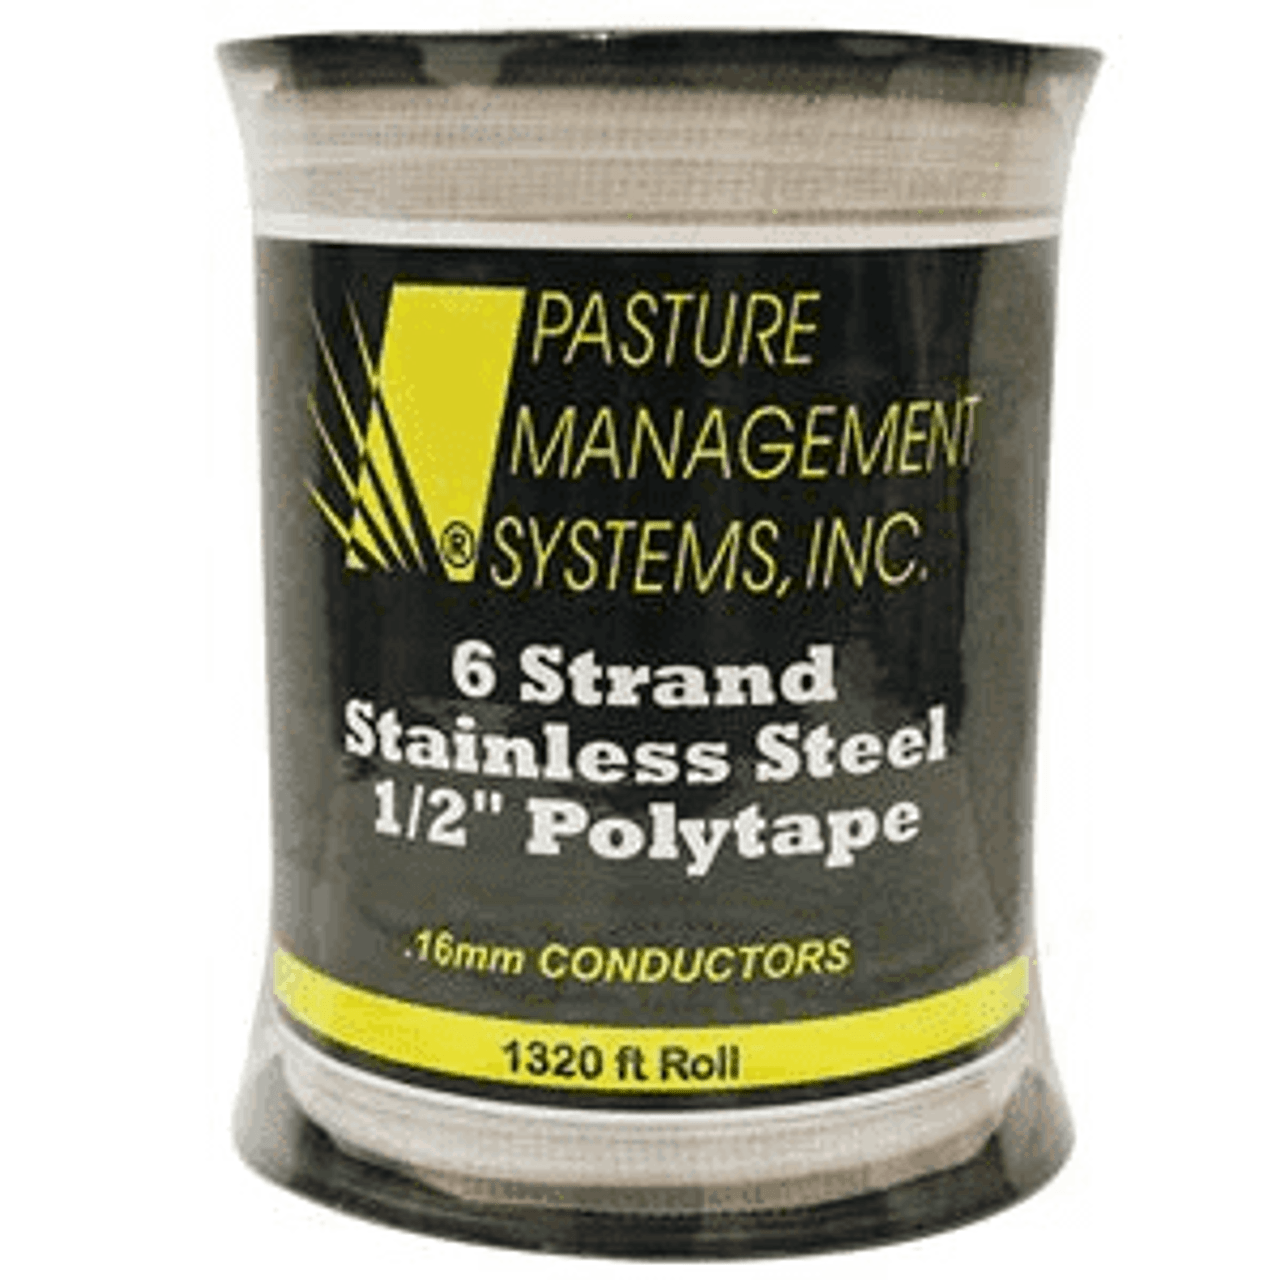 Pasture Management 1/2" x 1320' 6 Strand Polytape Roll